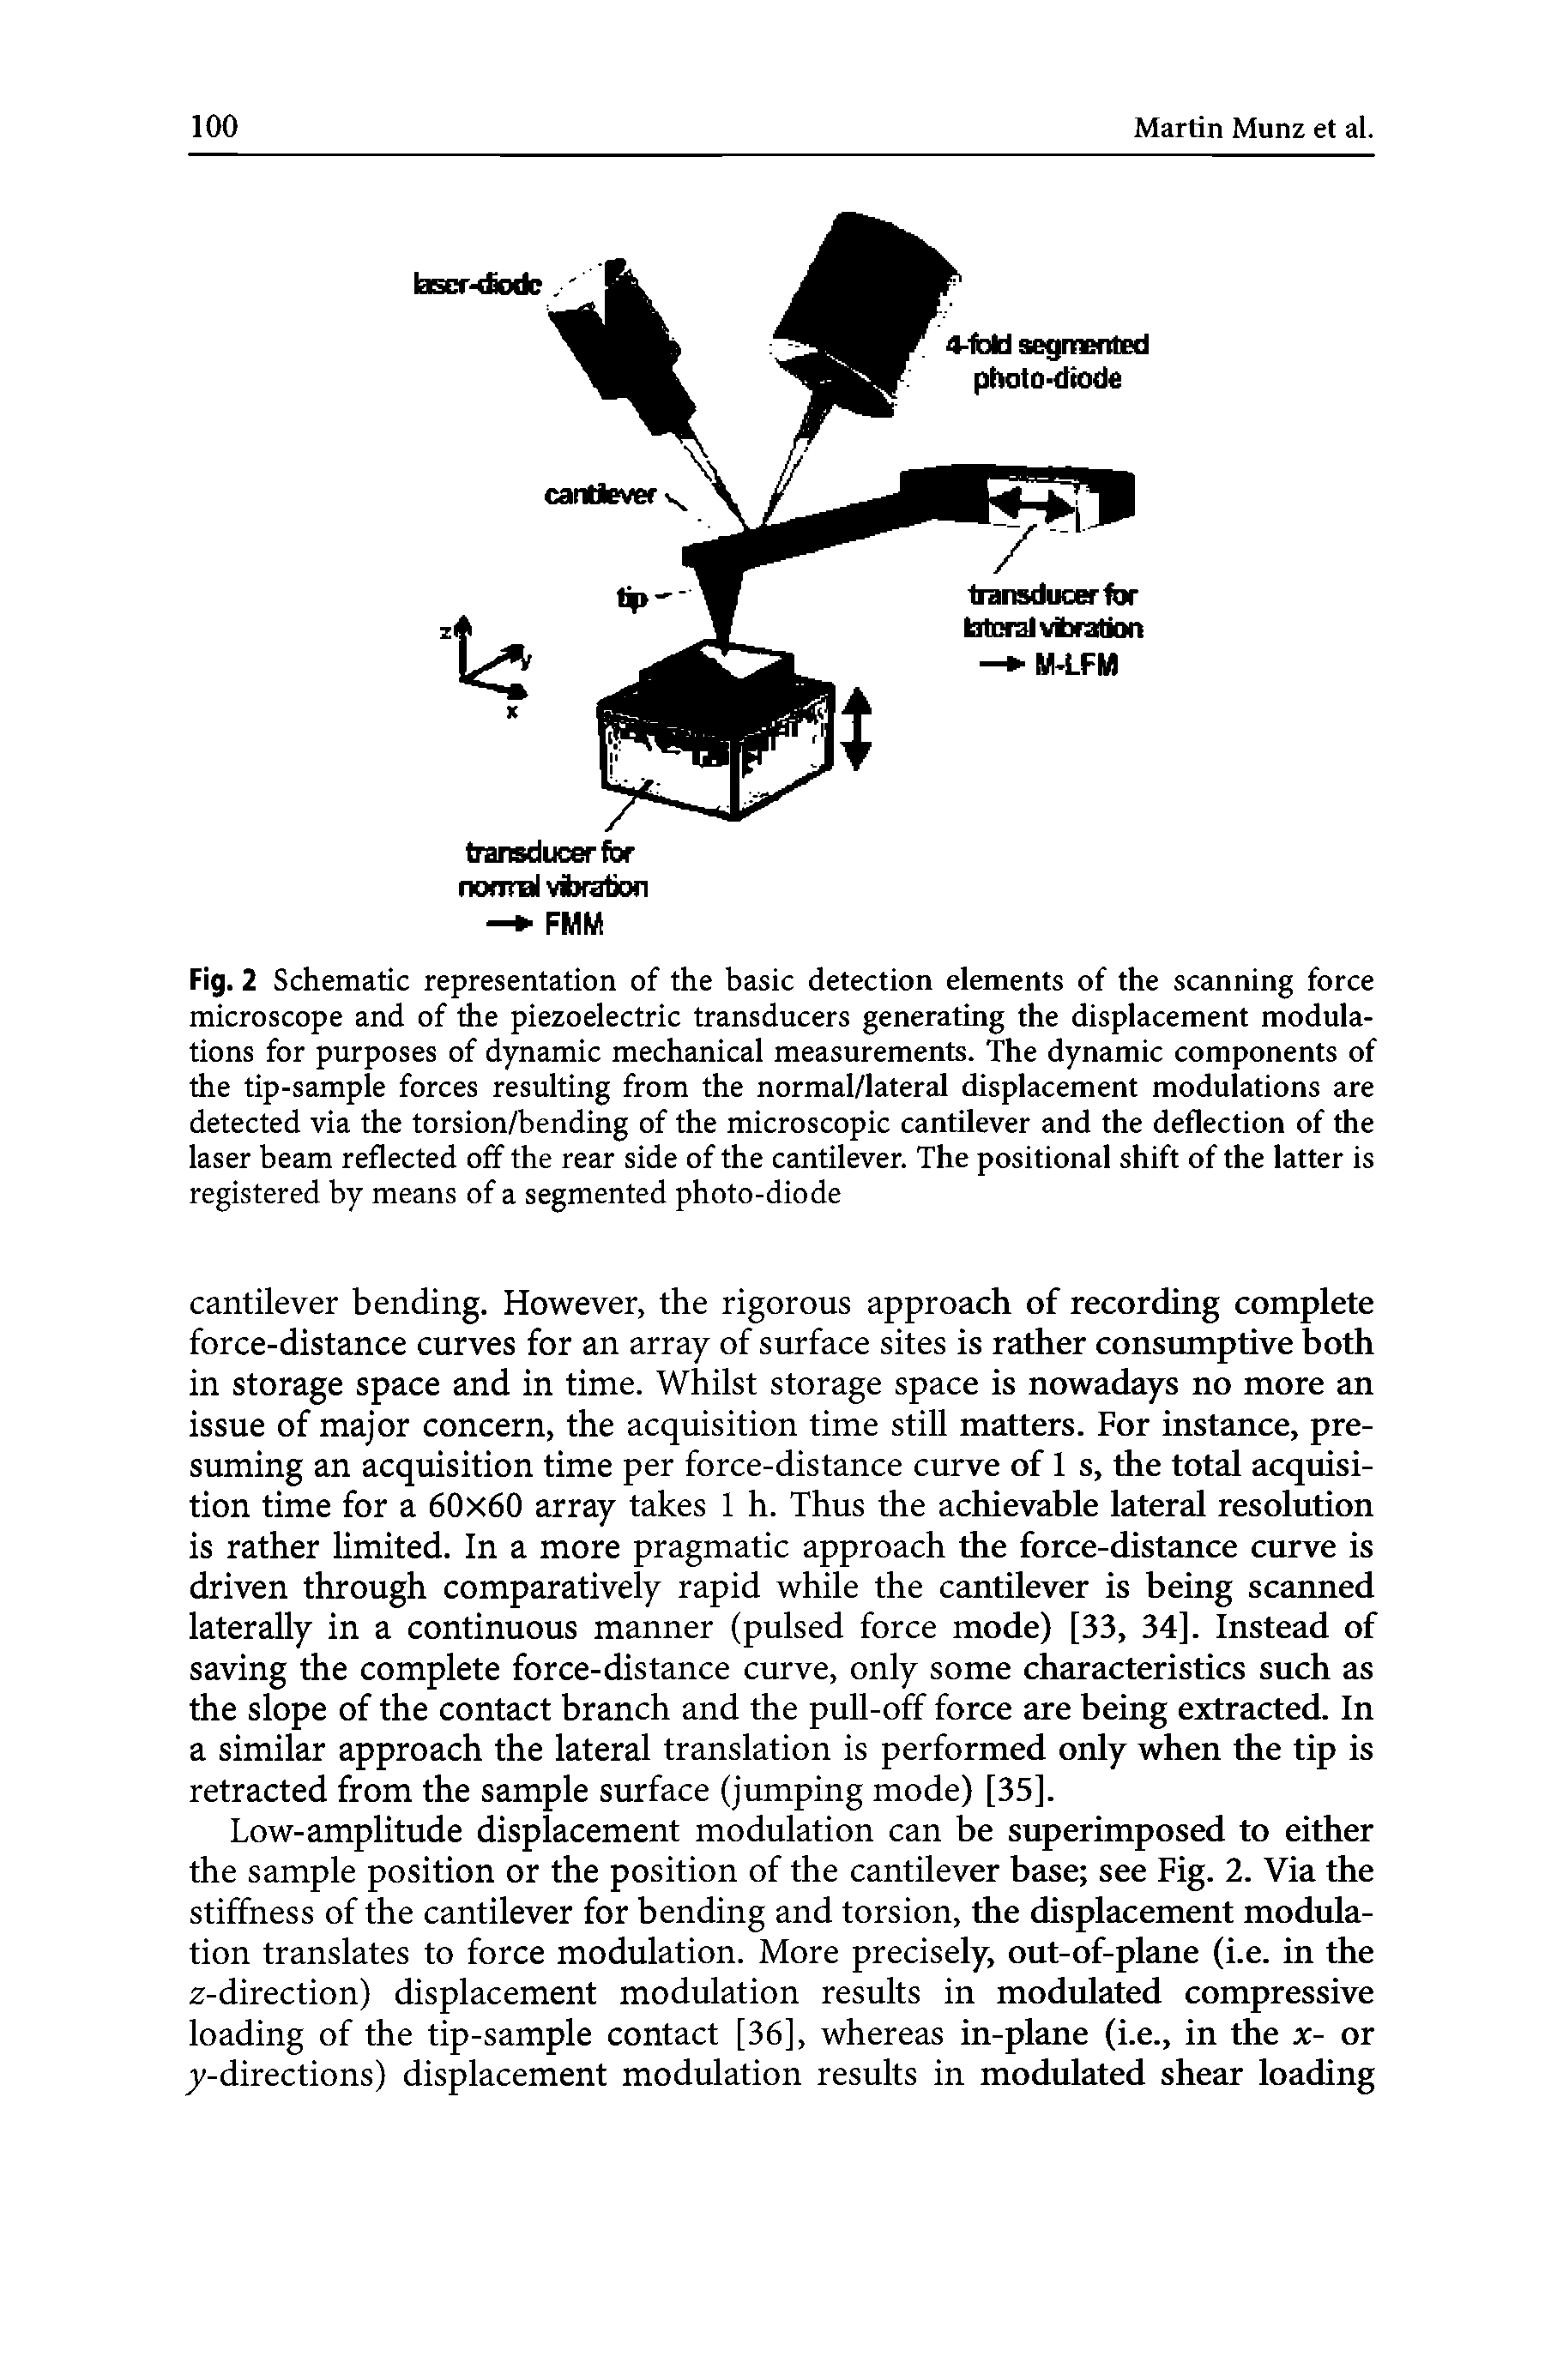 Fig. 2 Schematic representation of the basic detection elements of the scanning force microscope and of the piezoelectric transducers generating the displacement modulations for purposes of dynamic mechanical measurements. The dynamic components of the tip-sample forces resulting from the normal/lateral displacement modulations are detected via the torsion/bending of the microscopic cantilever and the deflection of the laser beam reflected off the rear side of the cantilever. The positional shift of the latter is registered by means of a segmented photo-diode...